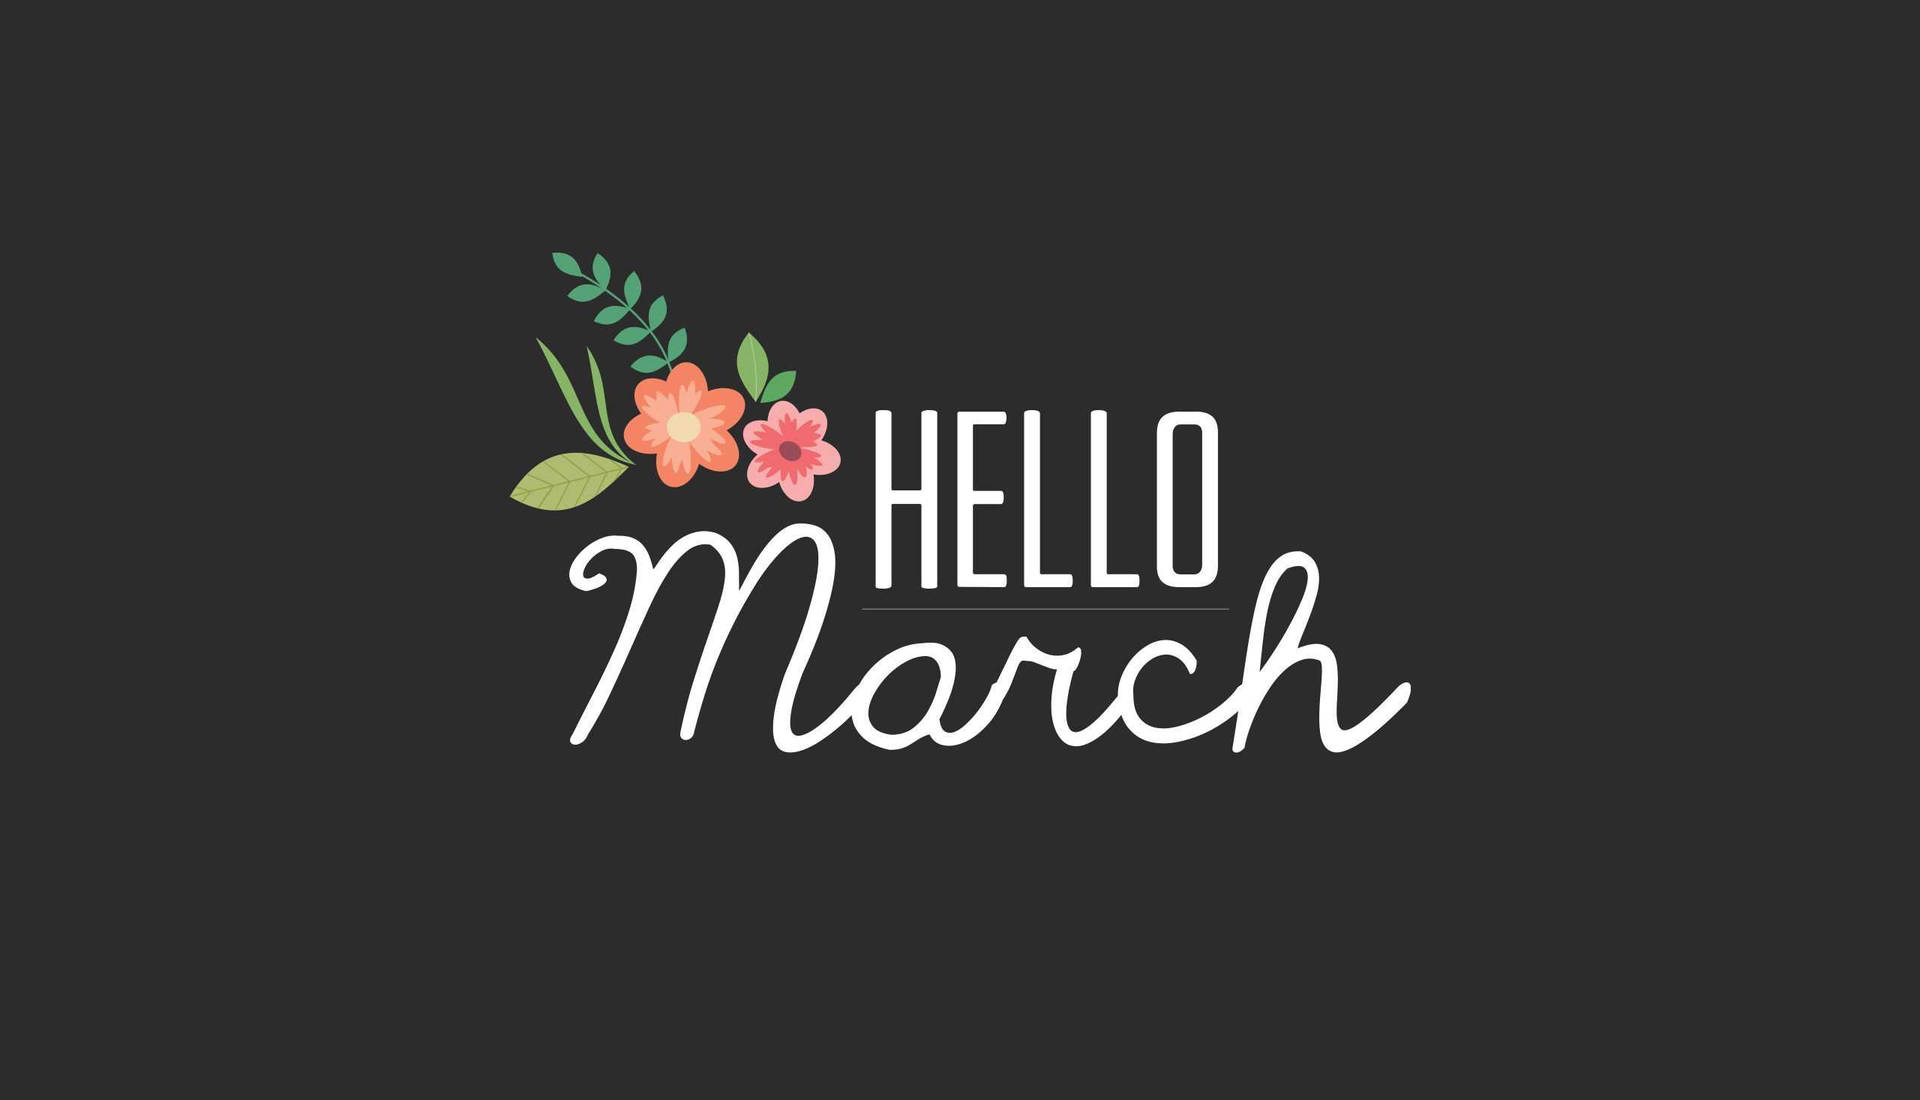 Hello March Image Background